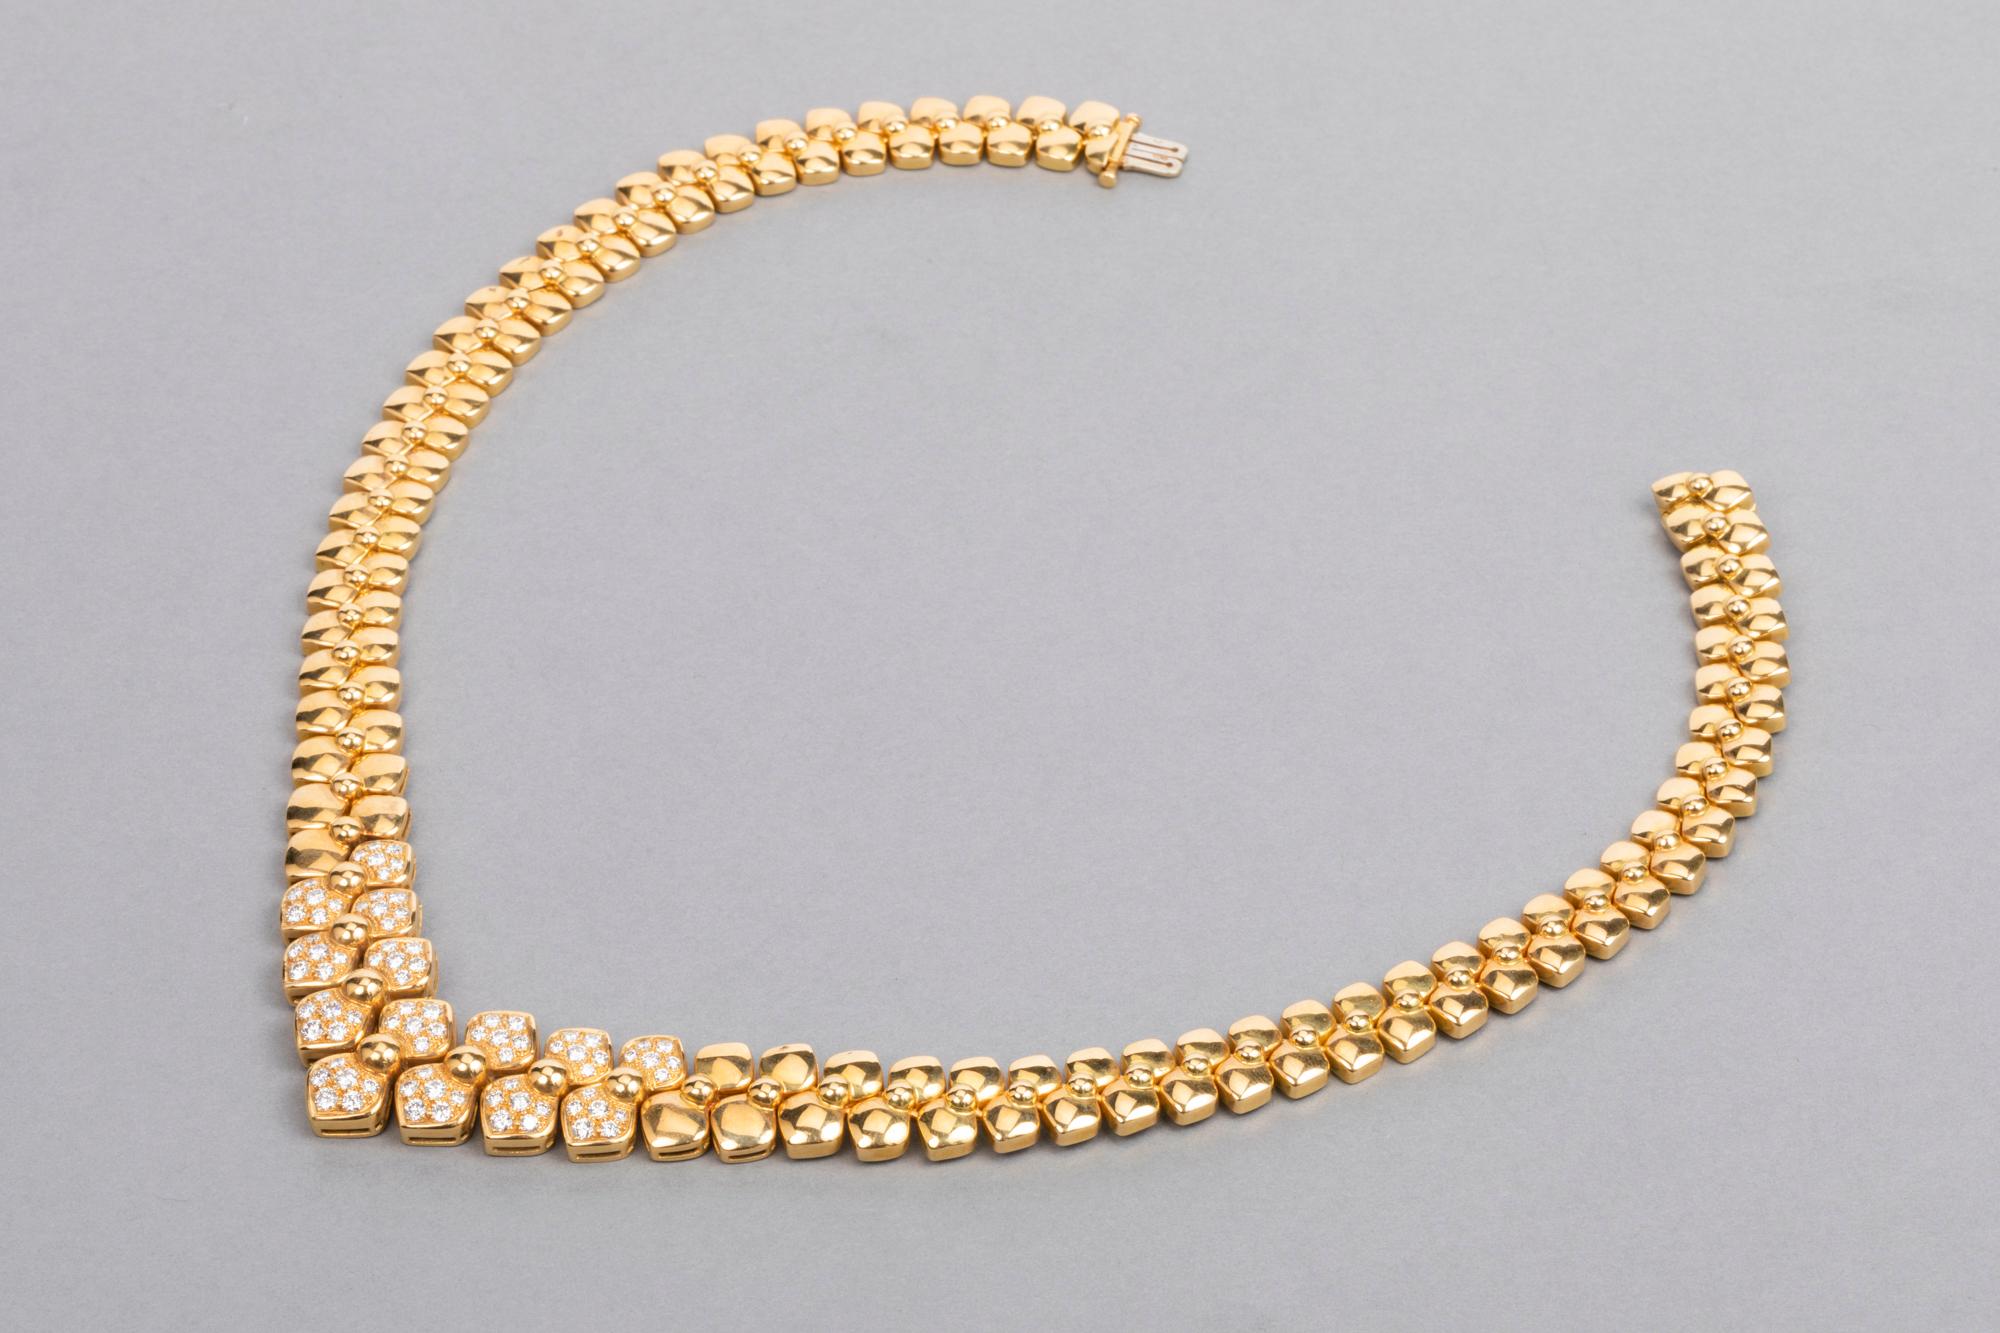 Van Cleef & Arpels Gold and Diamonds Fashion Necklace For Sale 7